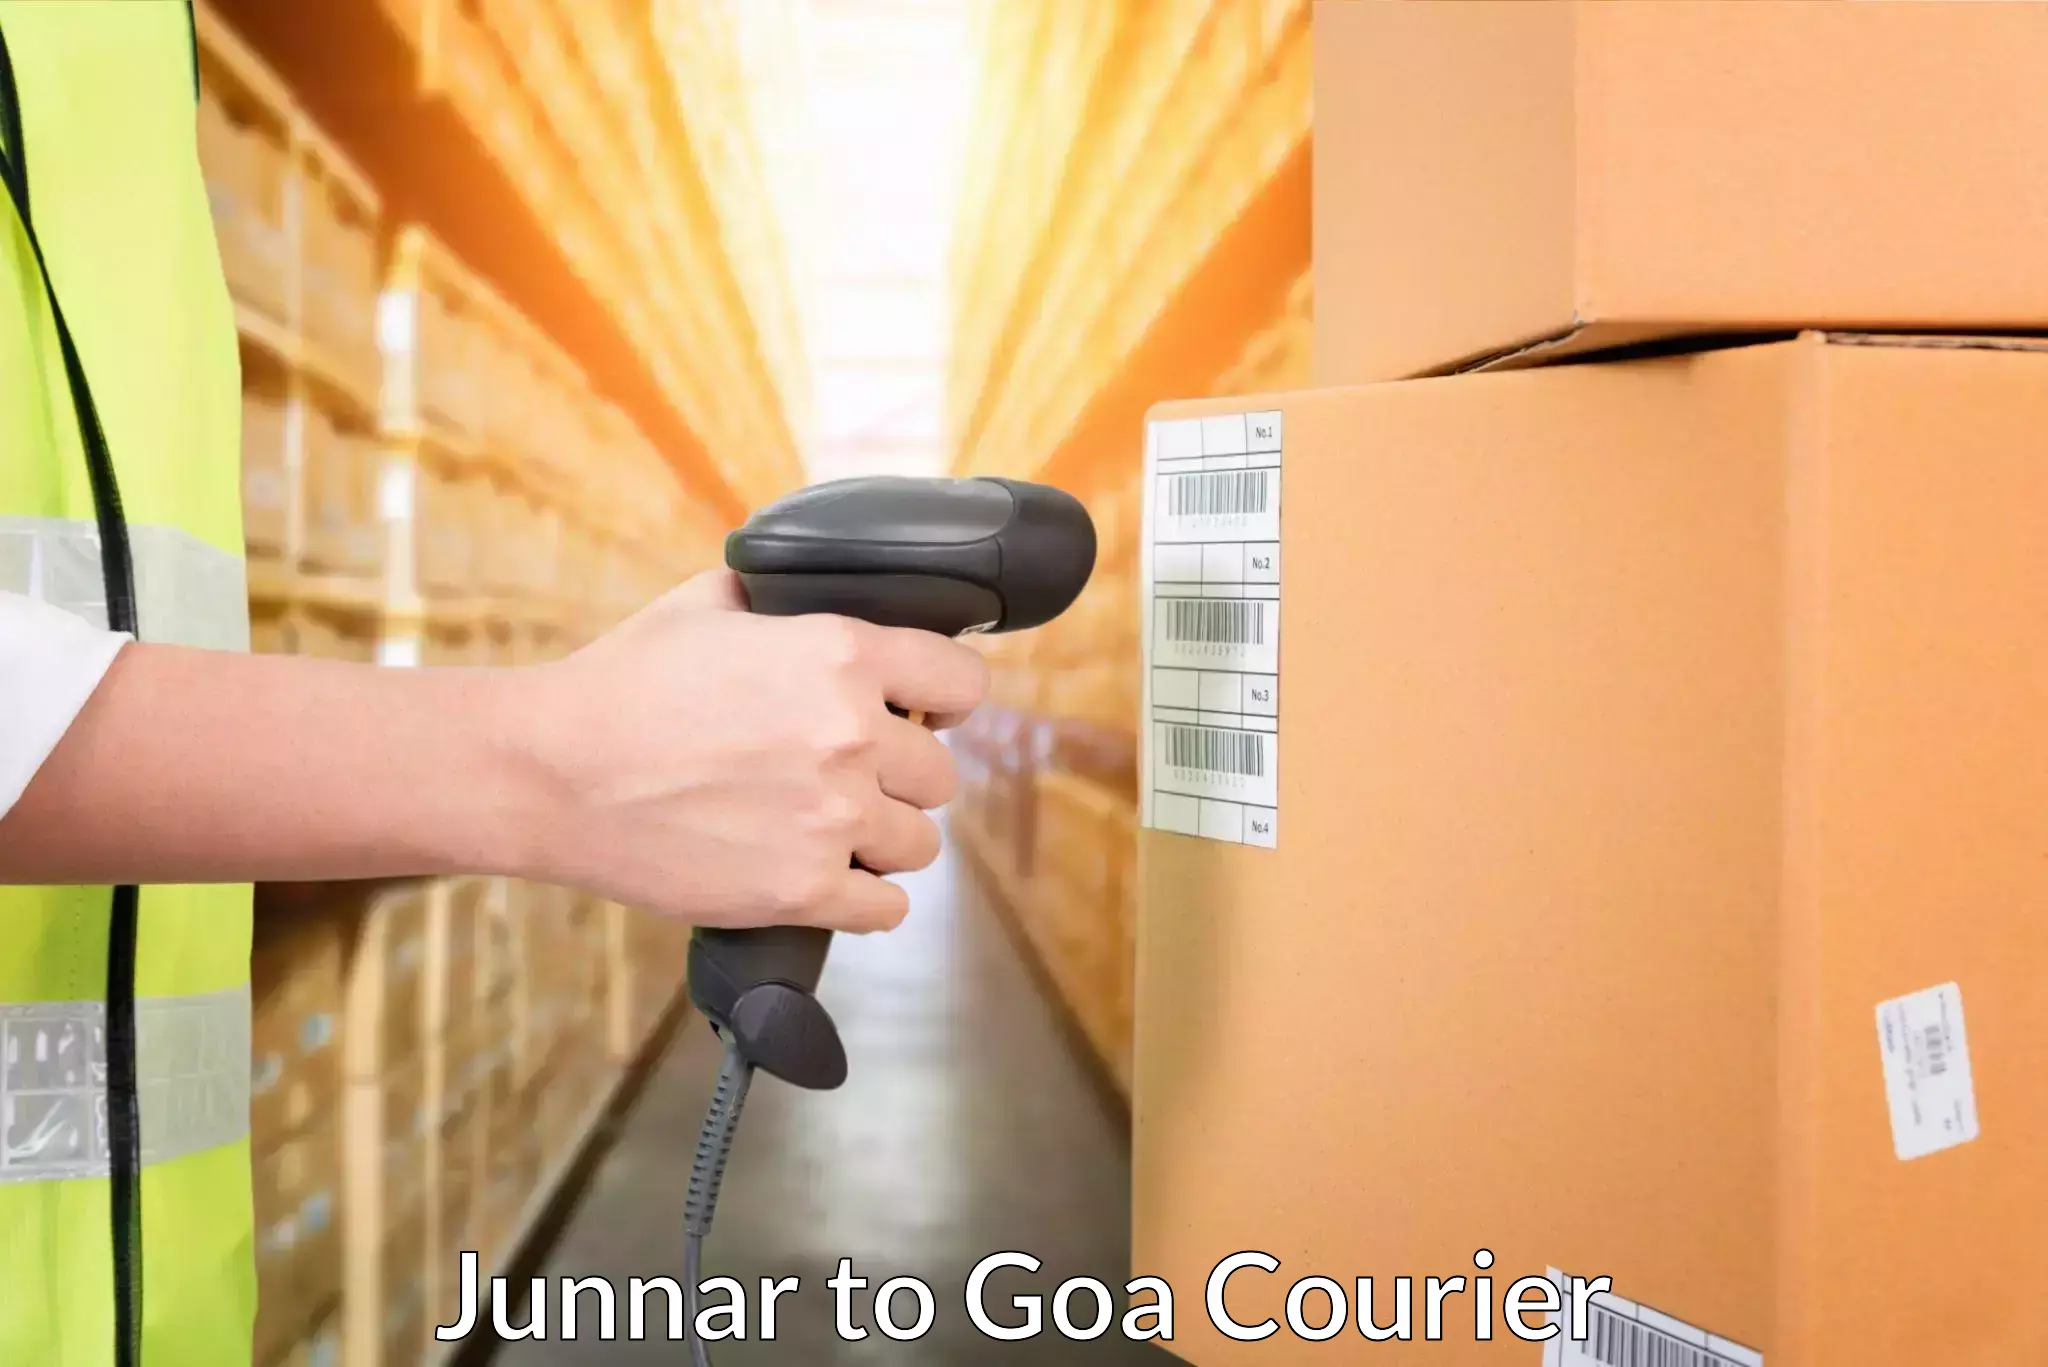 End-to-end delivery Junnar to Panaji